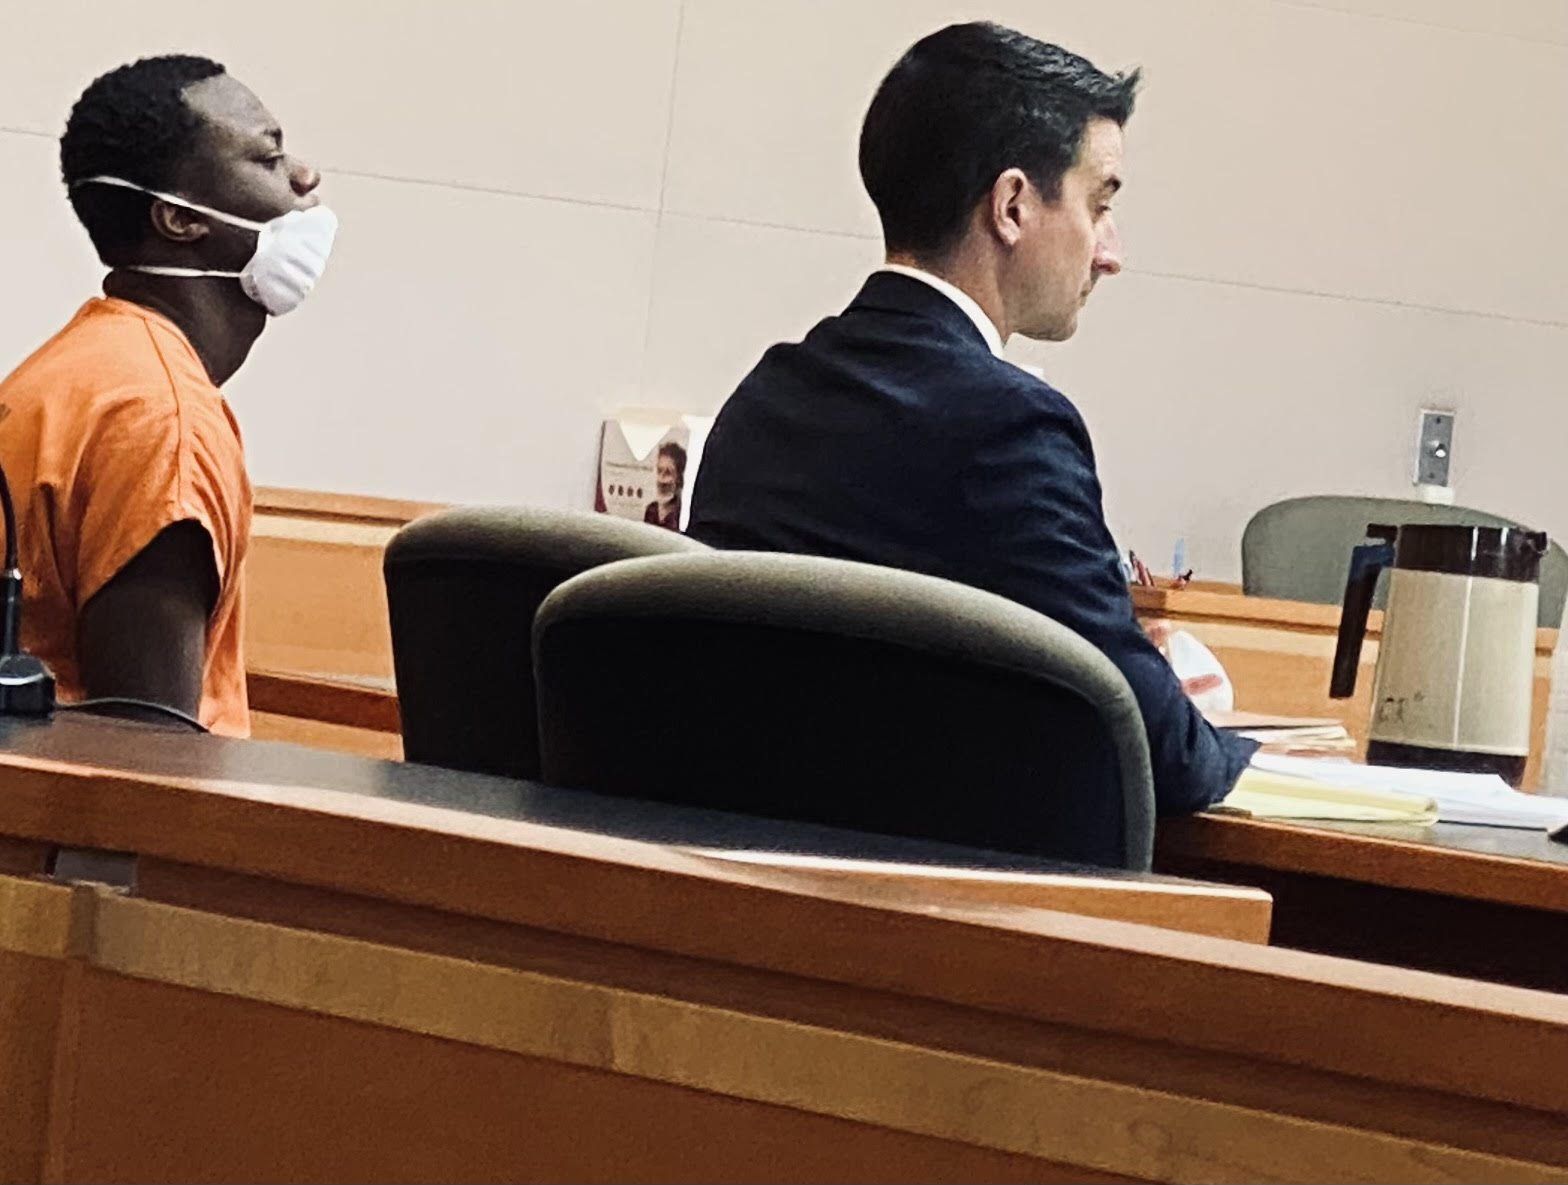 Akwasi Owusu, 21, left, on Tuesday waits for his insanity trial begin in Hillsborough County Superior Court Northern District. At right is one of his public defenders, Tom Stonitsch./Pat Grossmith